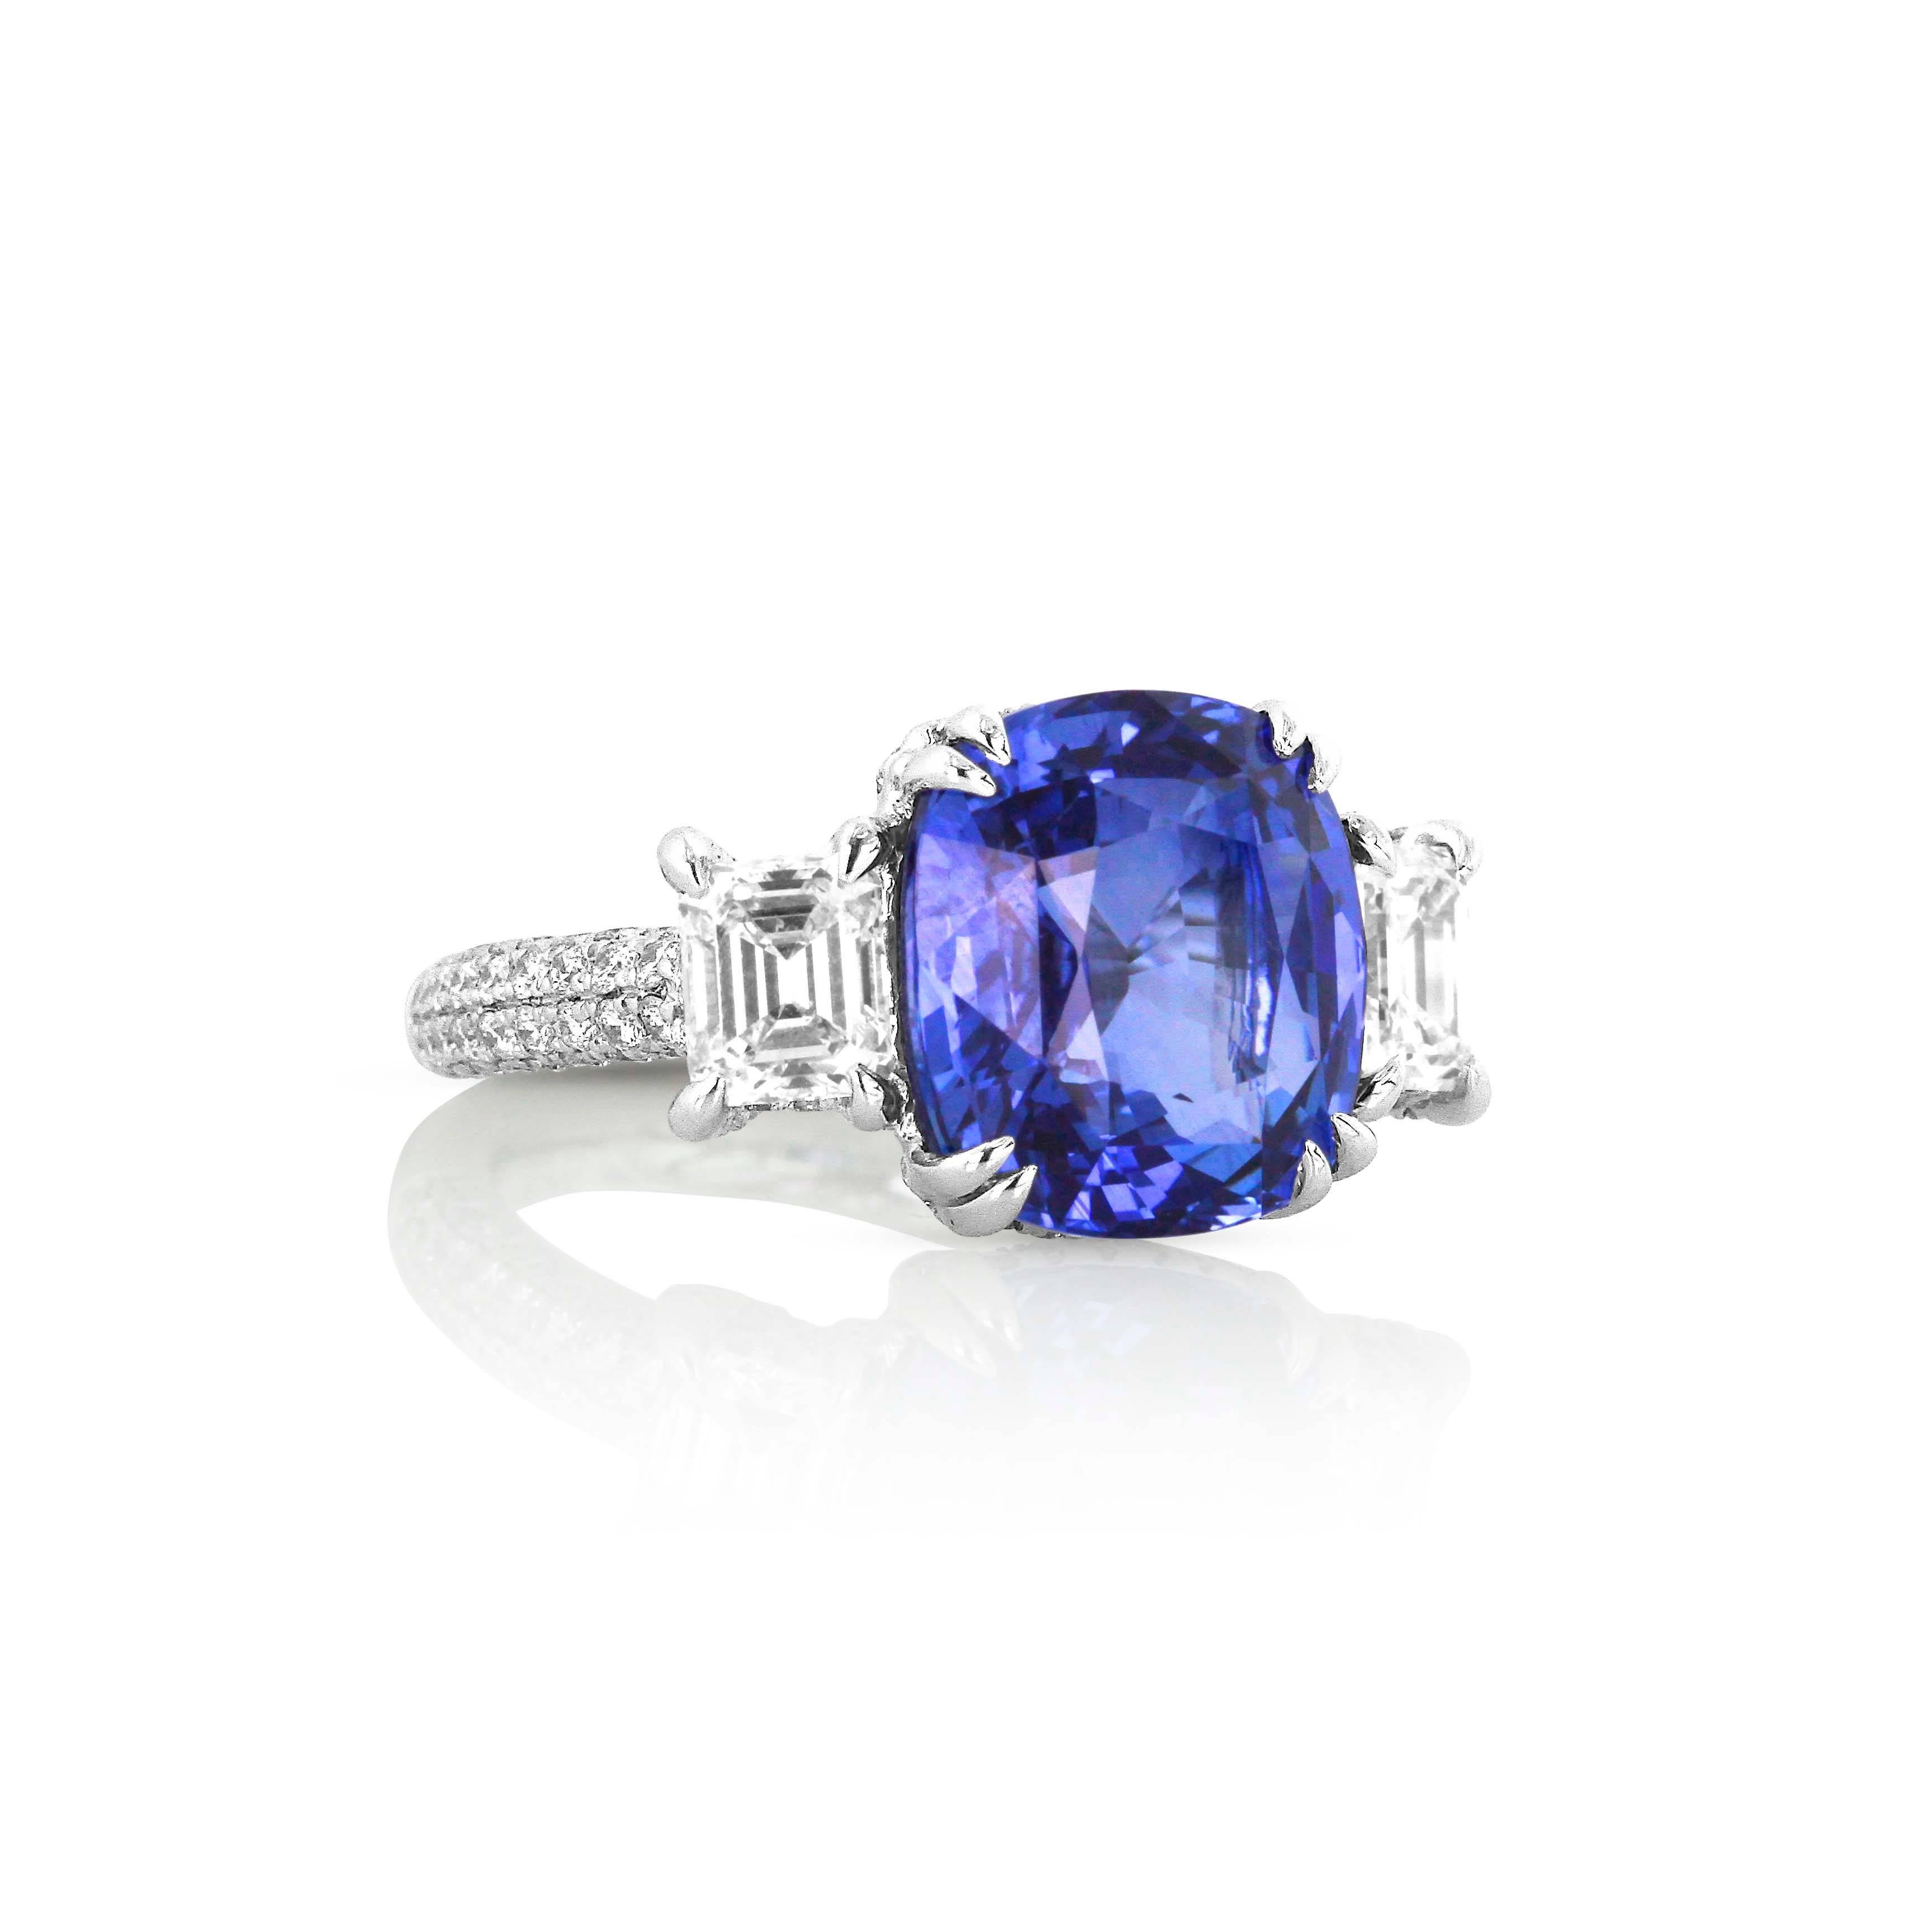 A diamond encrusted ring centers a magnificent blue sapphire accented with rectangular-shaped diamonds at the shoulders. The strong rectangular lines of the diamonds emphasis the softer cushion-shape of the sapphire to create an alluring